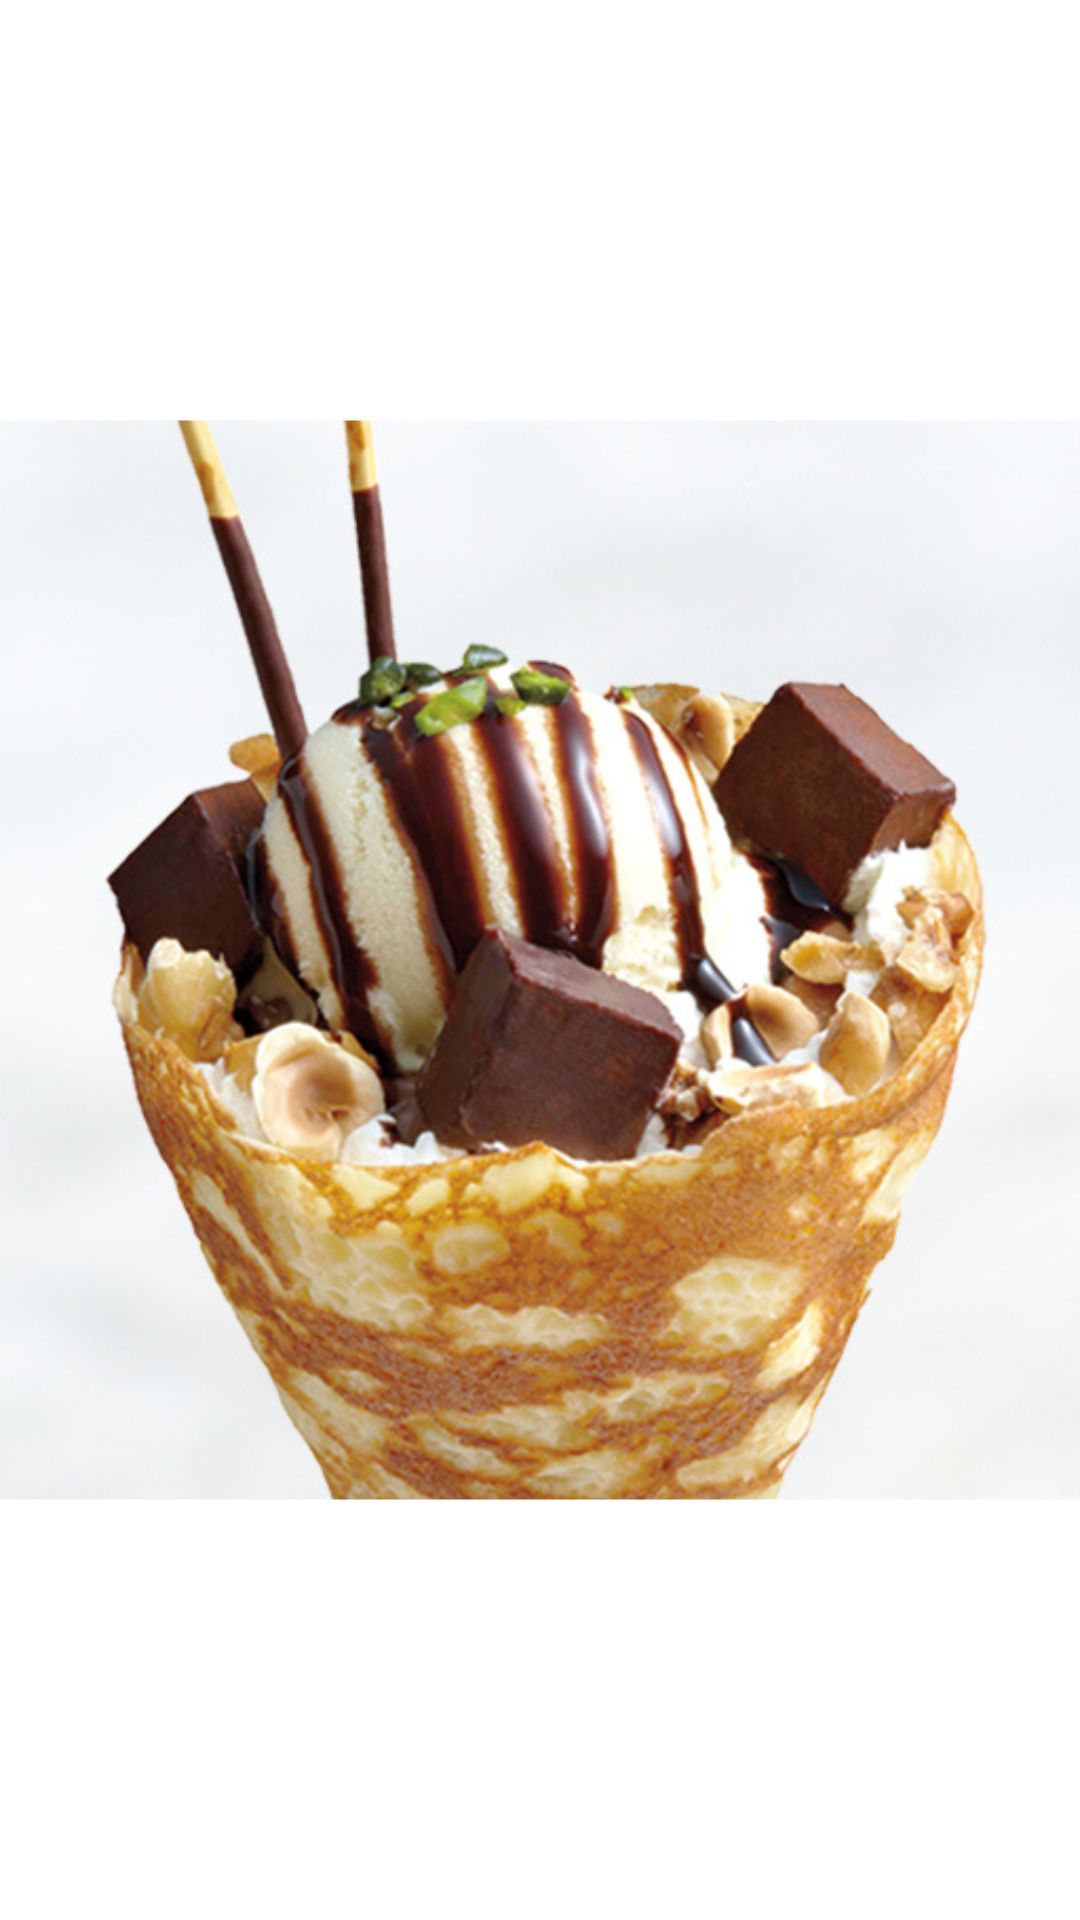 13. Chocolate Nut Party Crepe